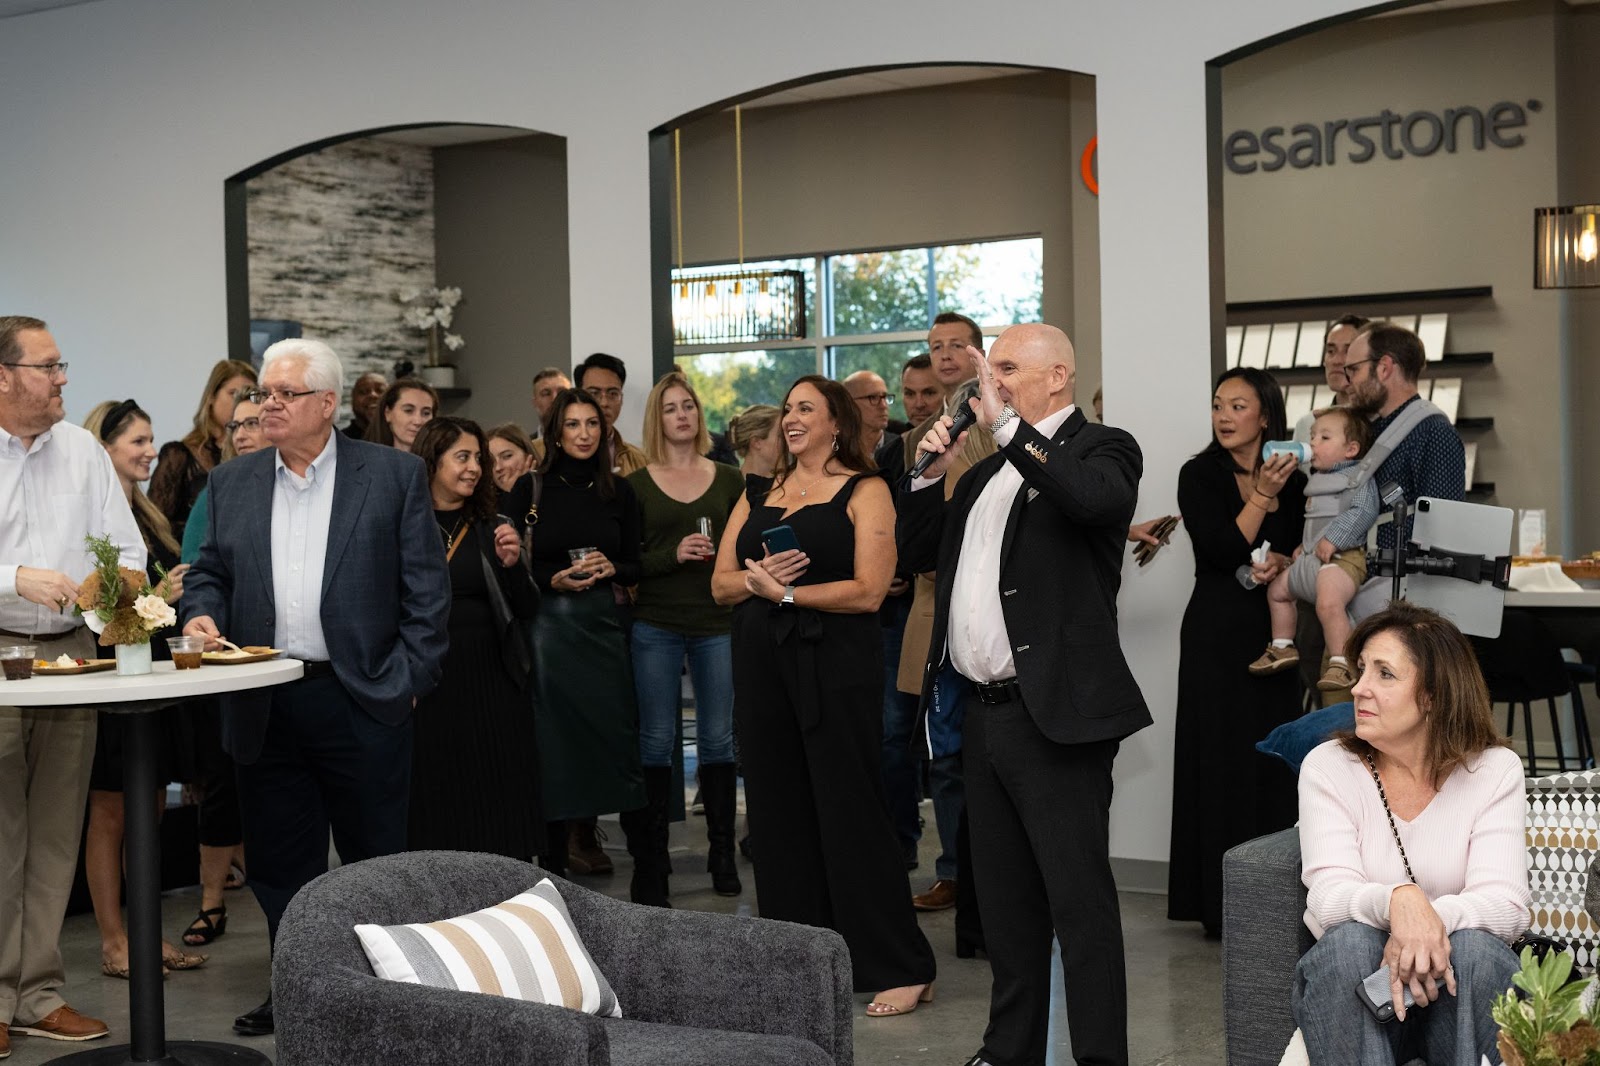 Some of the leading design mavens in North America were present in Caesarstone’s grand opening. 